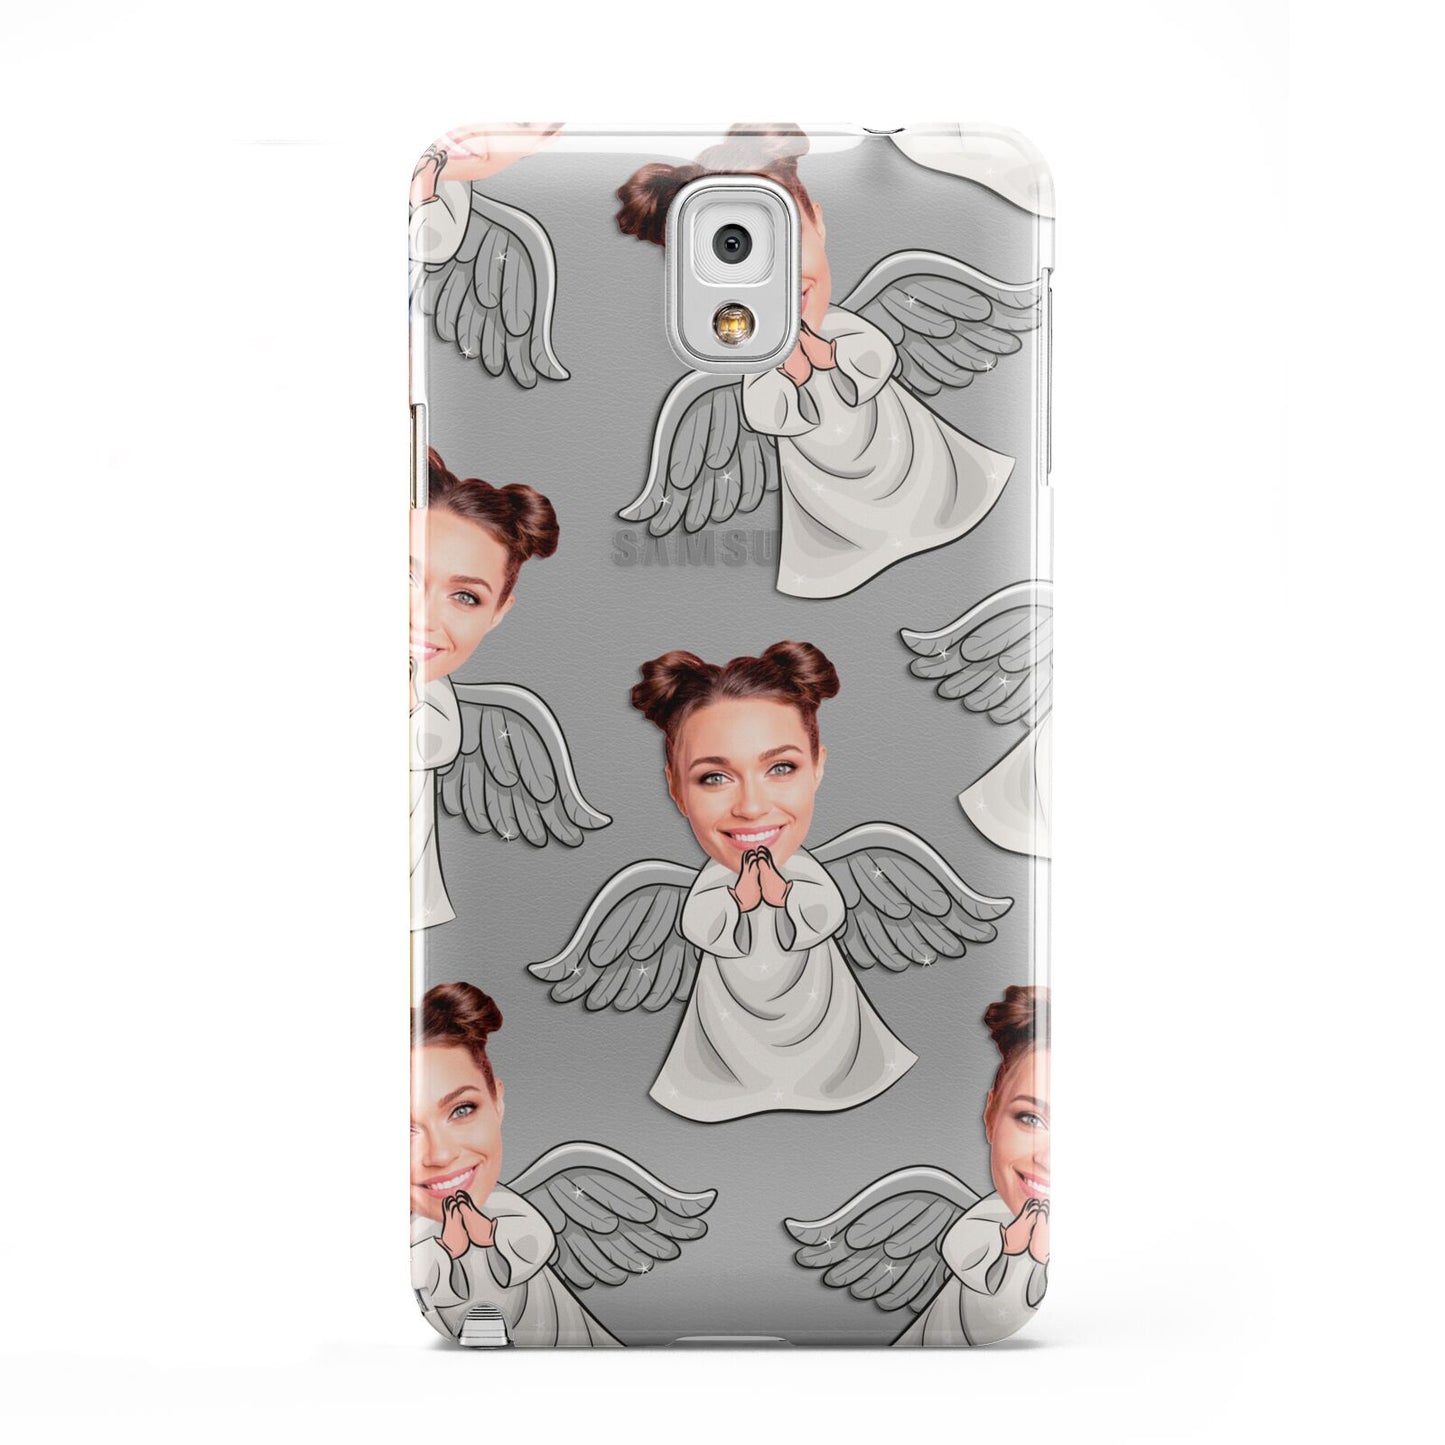 Angel Photo Face Samsung Galaxy Note 3 Case